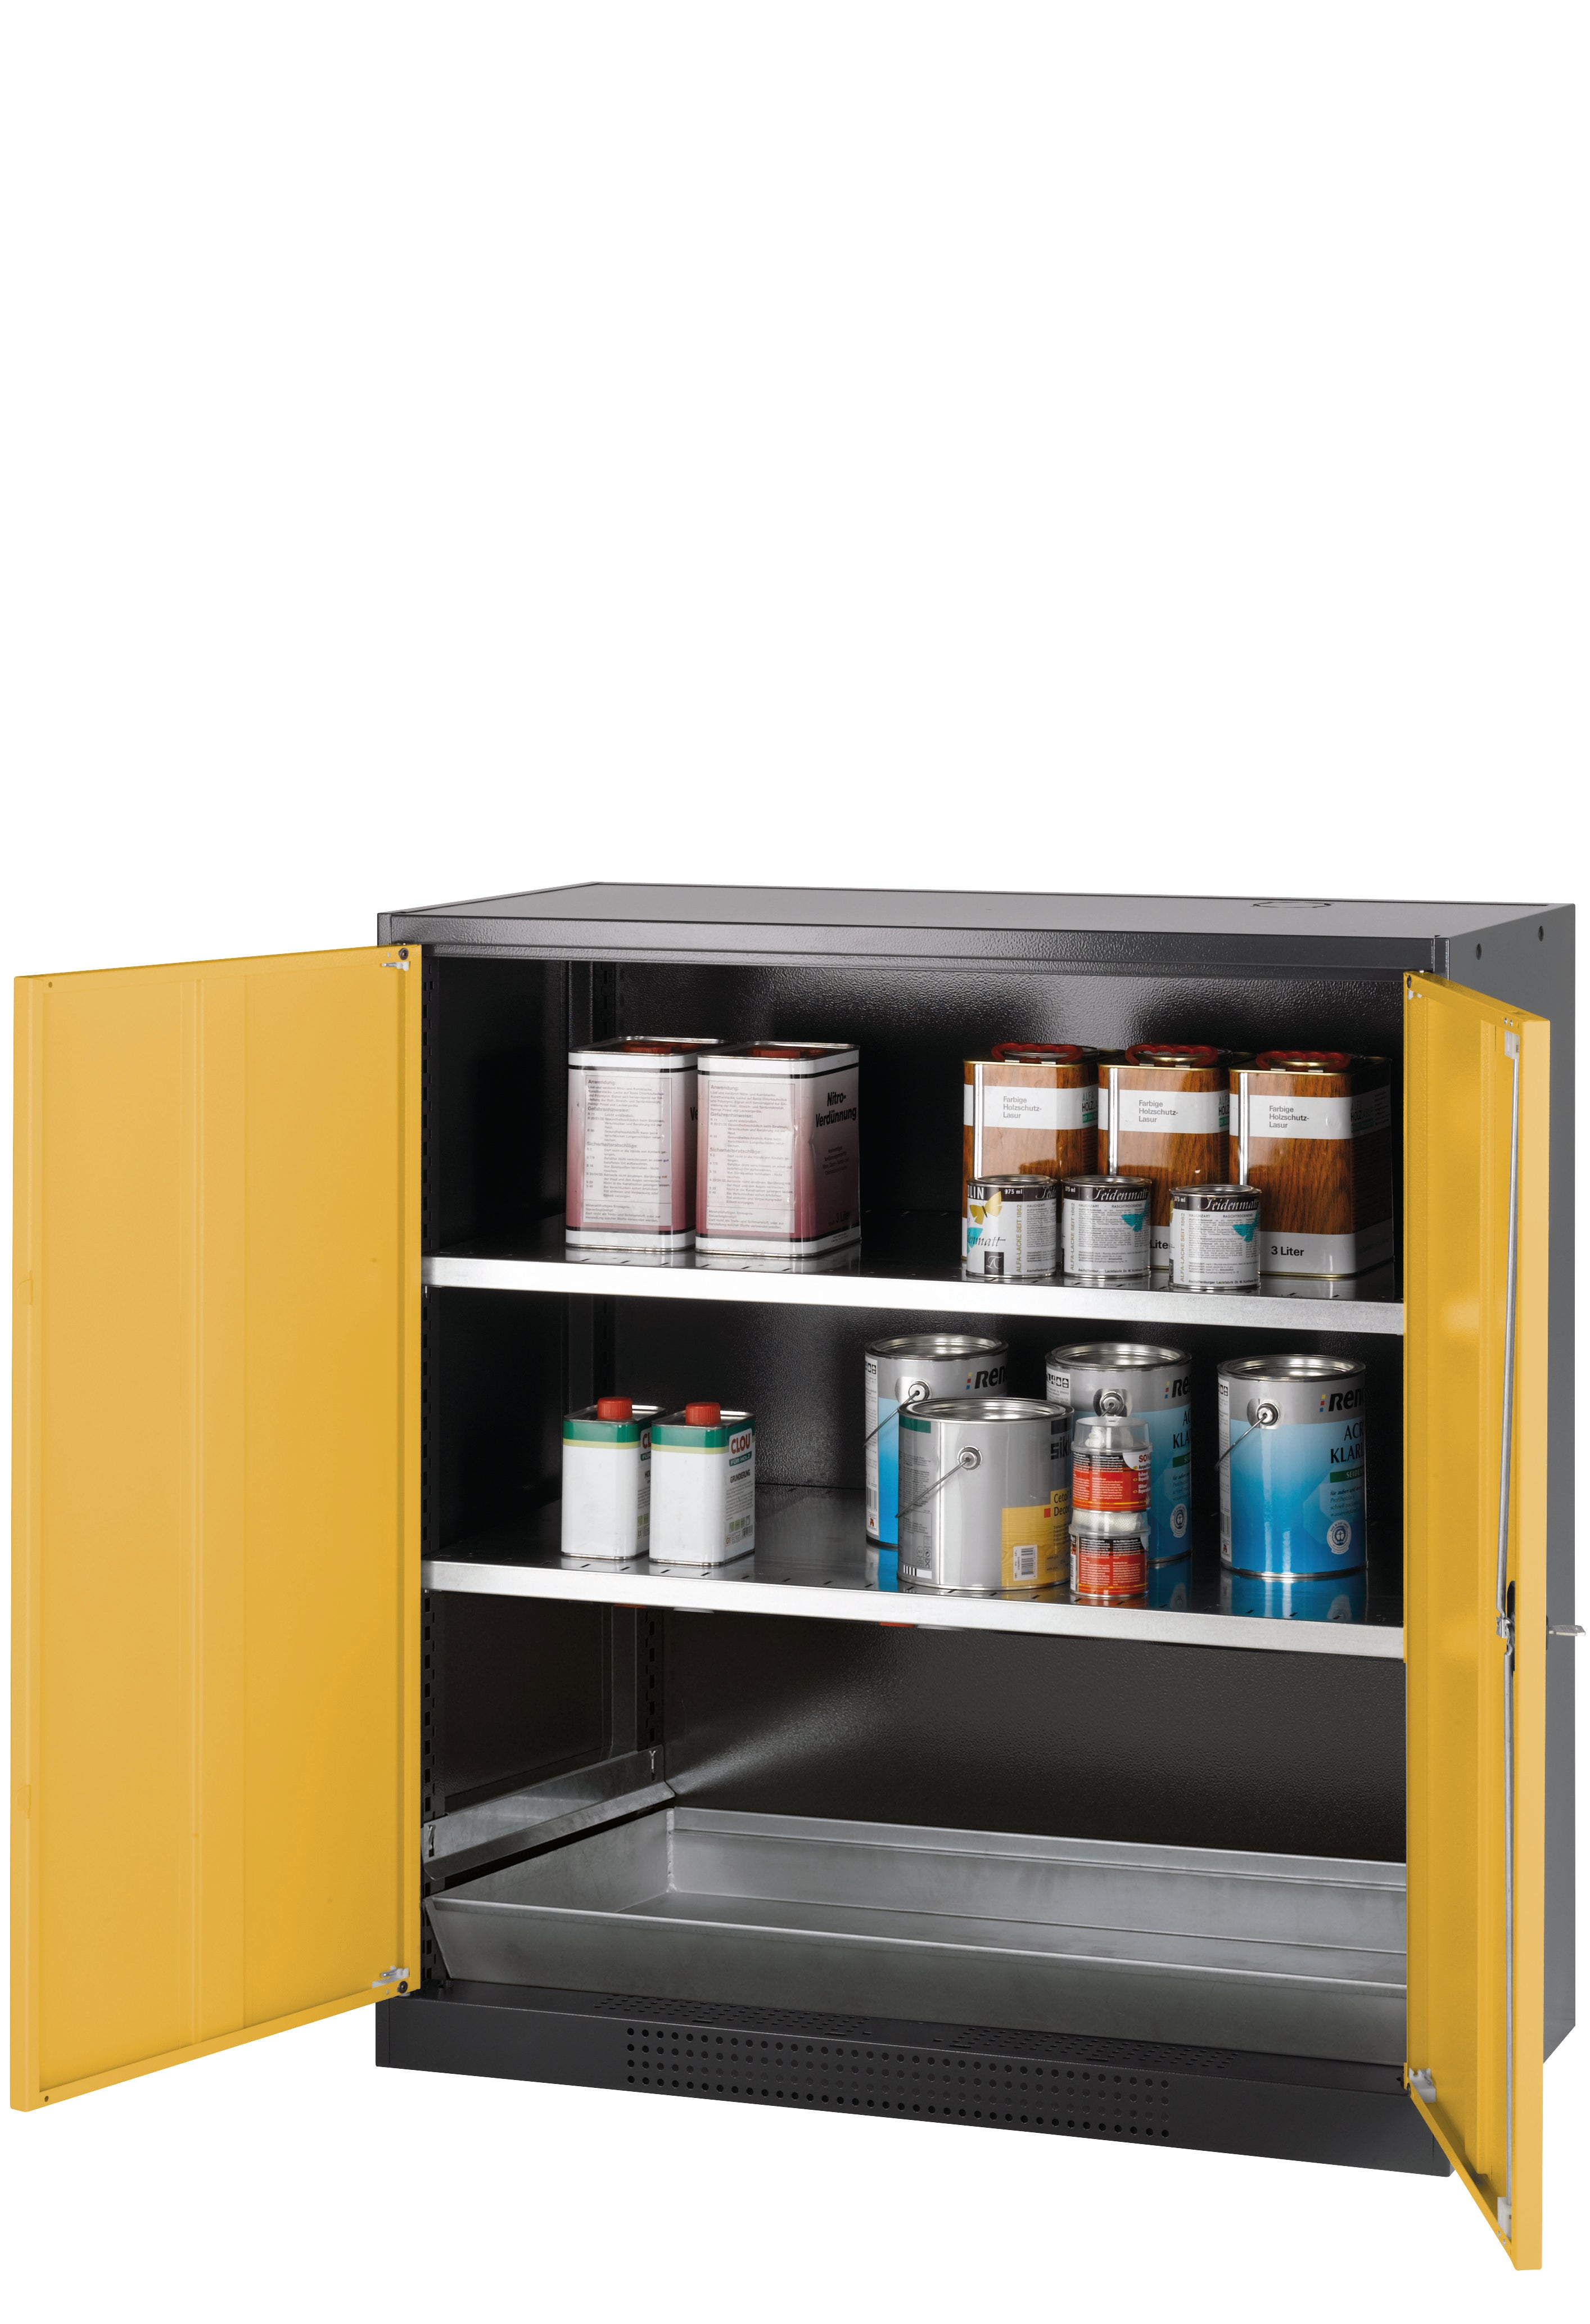 Chemical cabinet CS-CLASSIC model CS.110.105 in safety yellow RAL 1004 with 2x standard shelves (sheet steel)